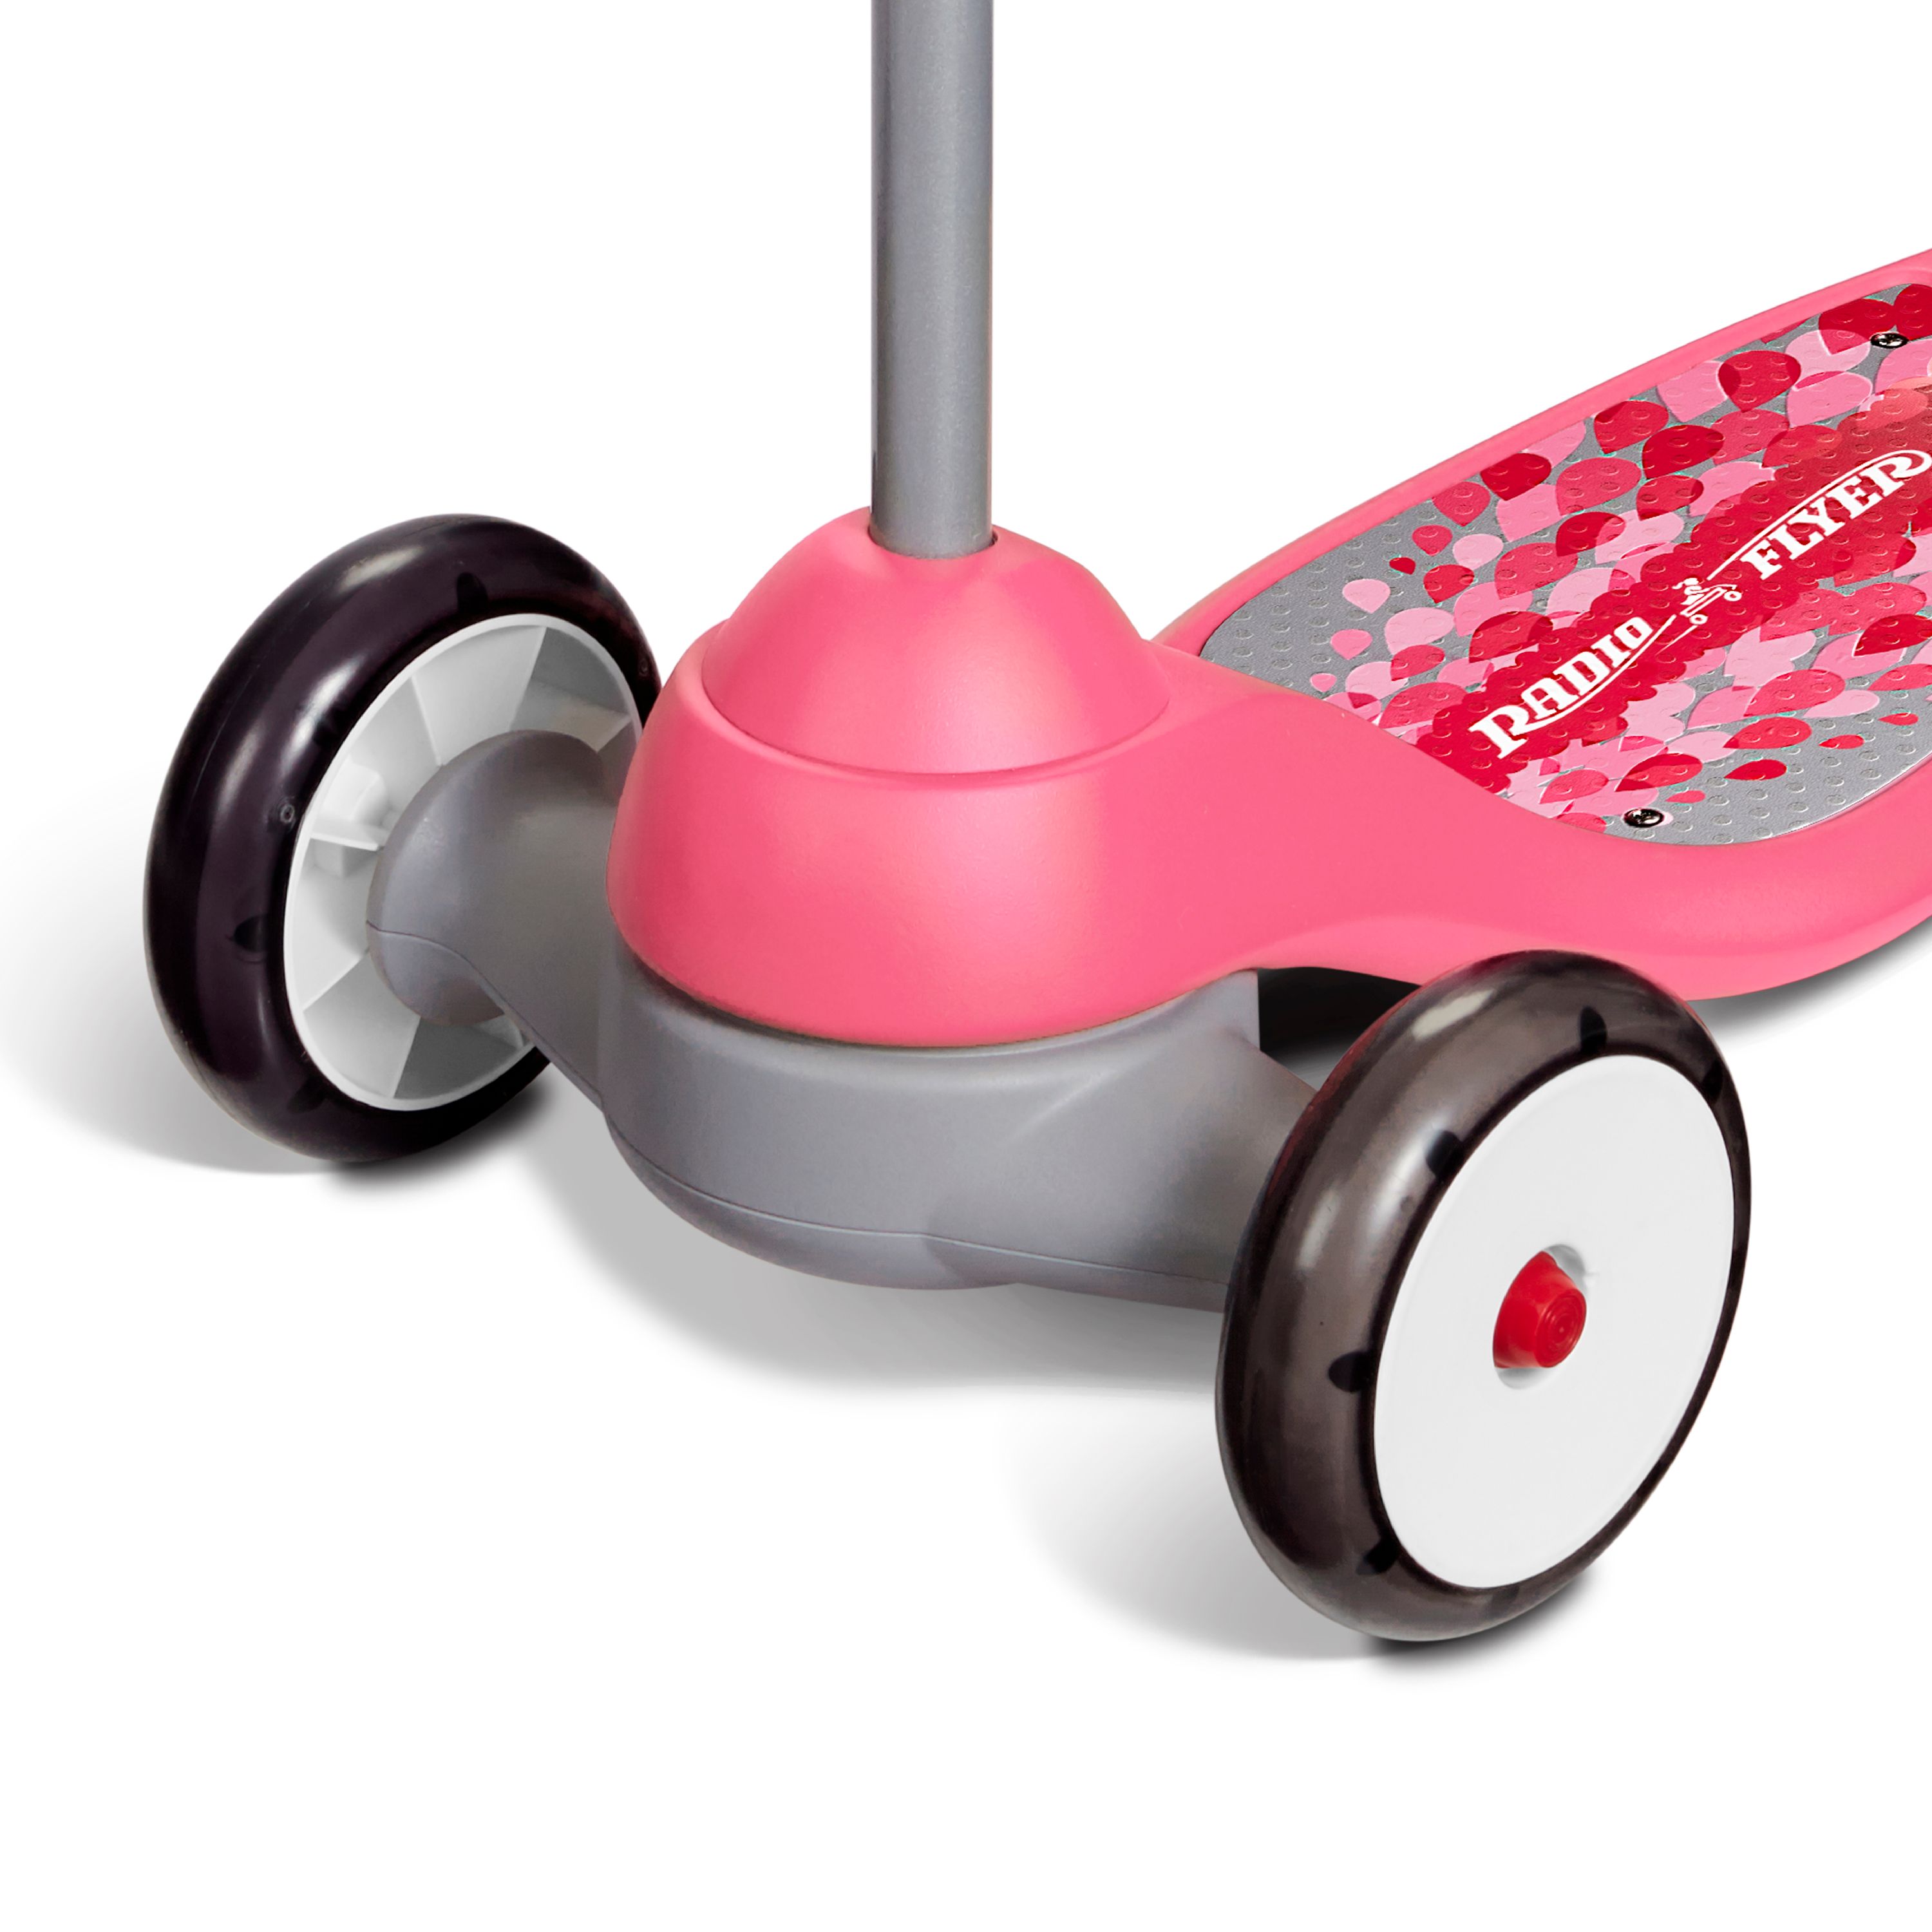 Radio Flyer, My 1st Scooter Sparkle, Three Wheel Scooter, Pink - image 3 of 5